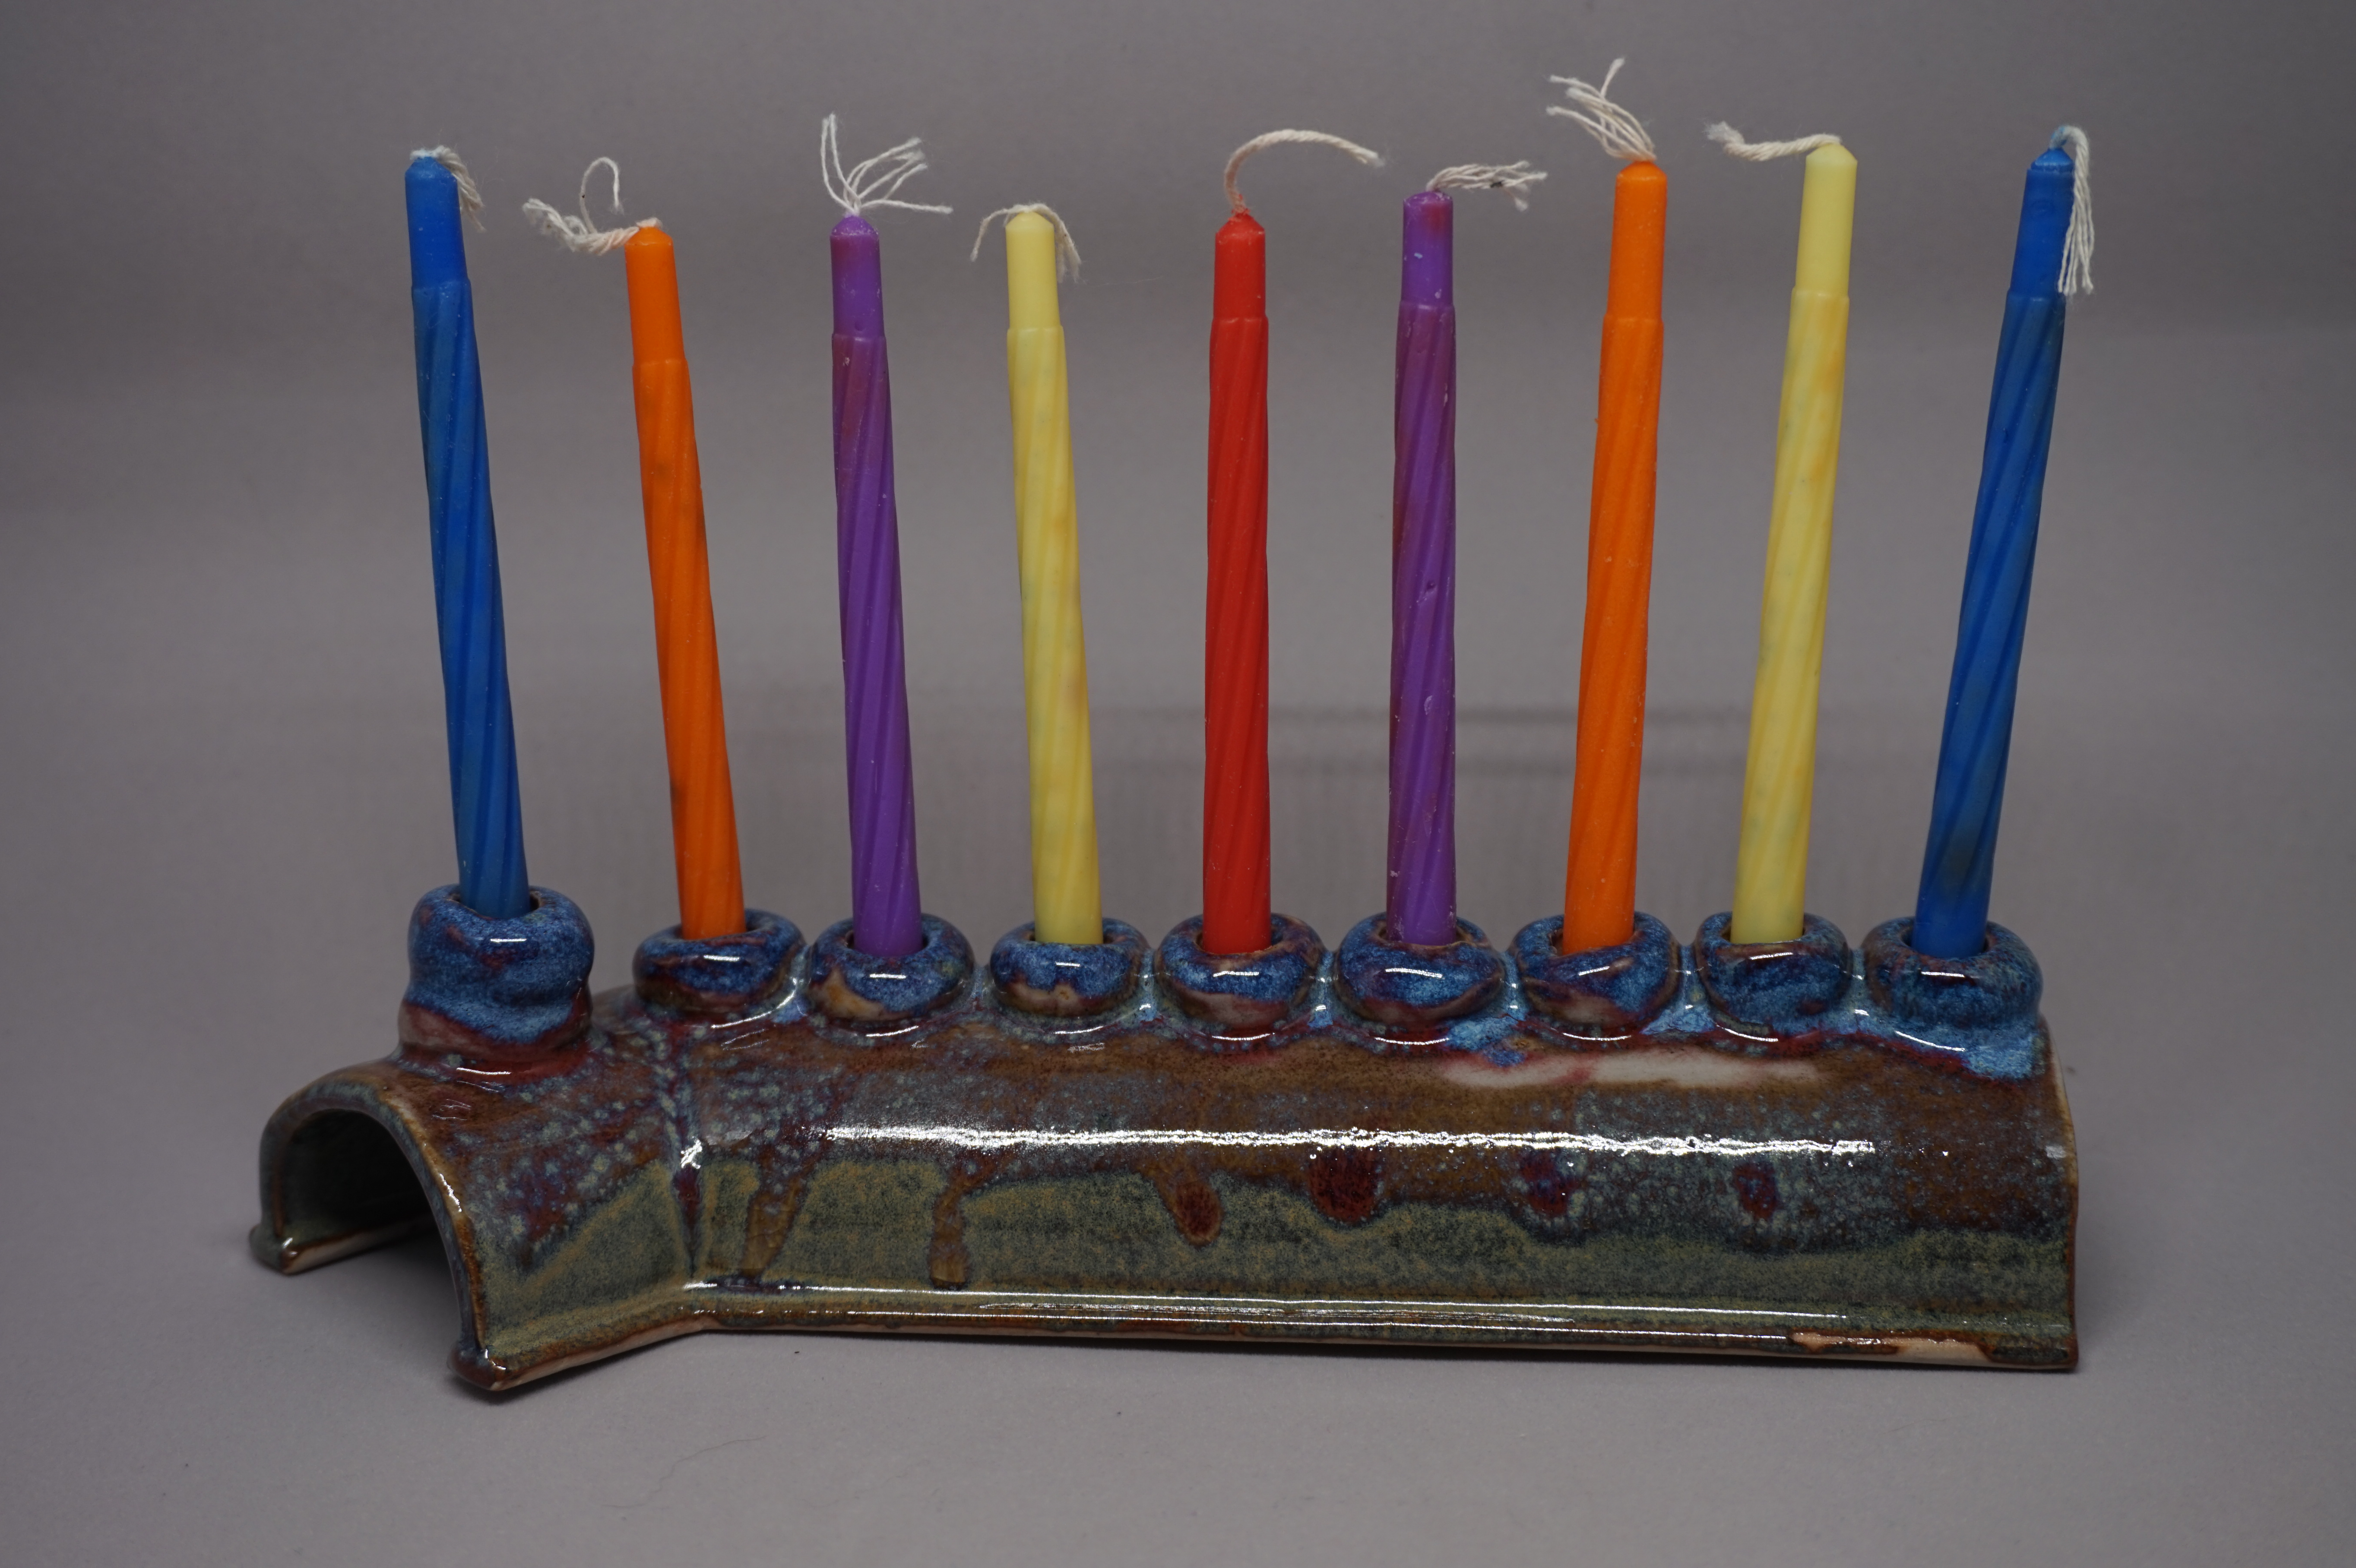 hanukkiah with 9 candles in it